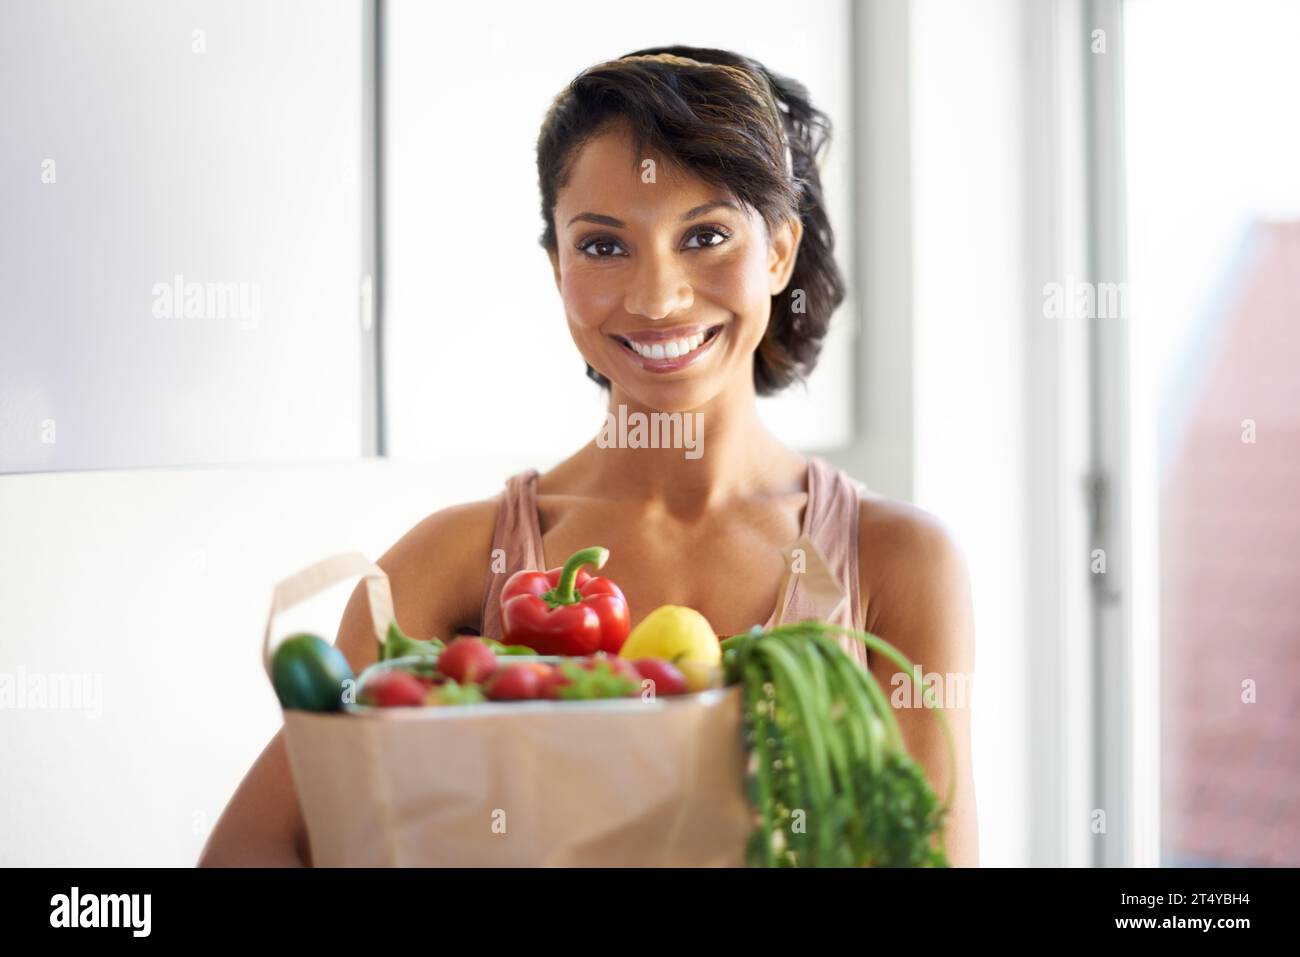 Happy woman, portrait and shopping bag in kitchen with groceries, vegetables or fresh produce at home. Female person, shopper or vegan smile with food Stock Photo